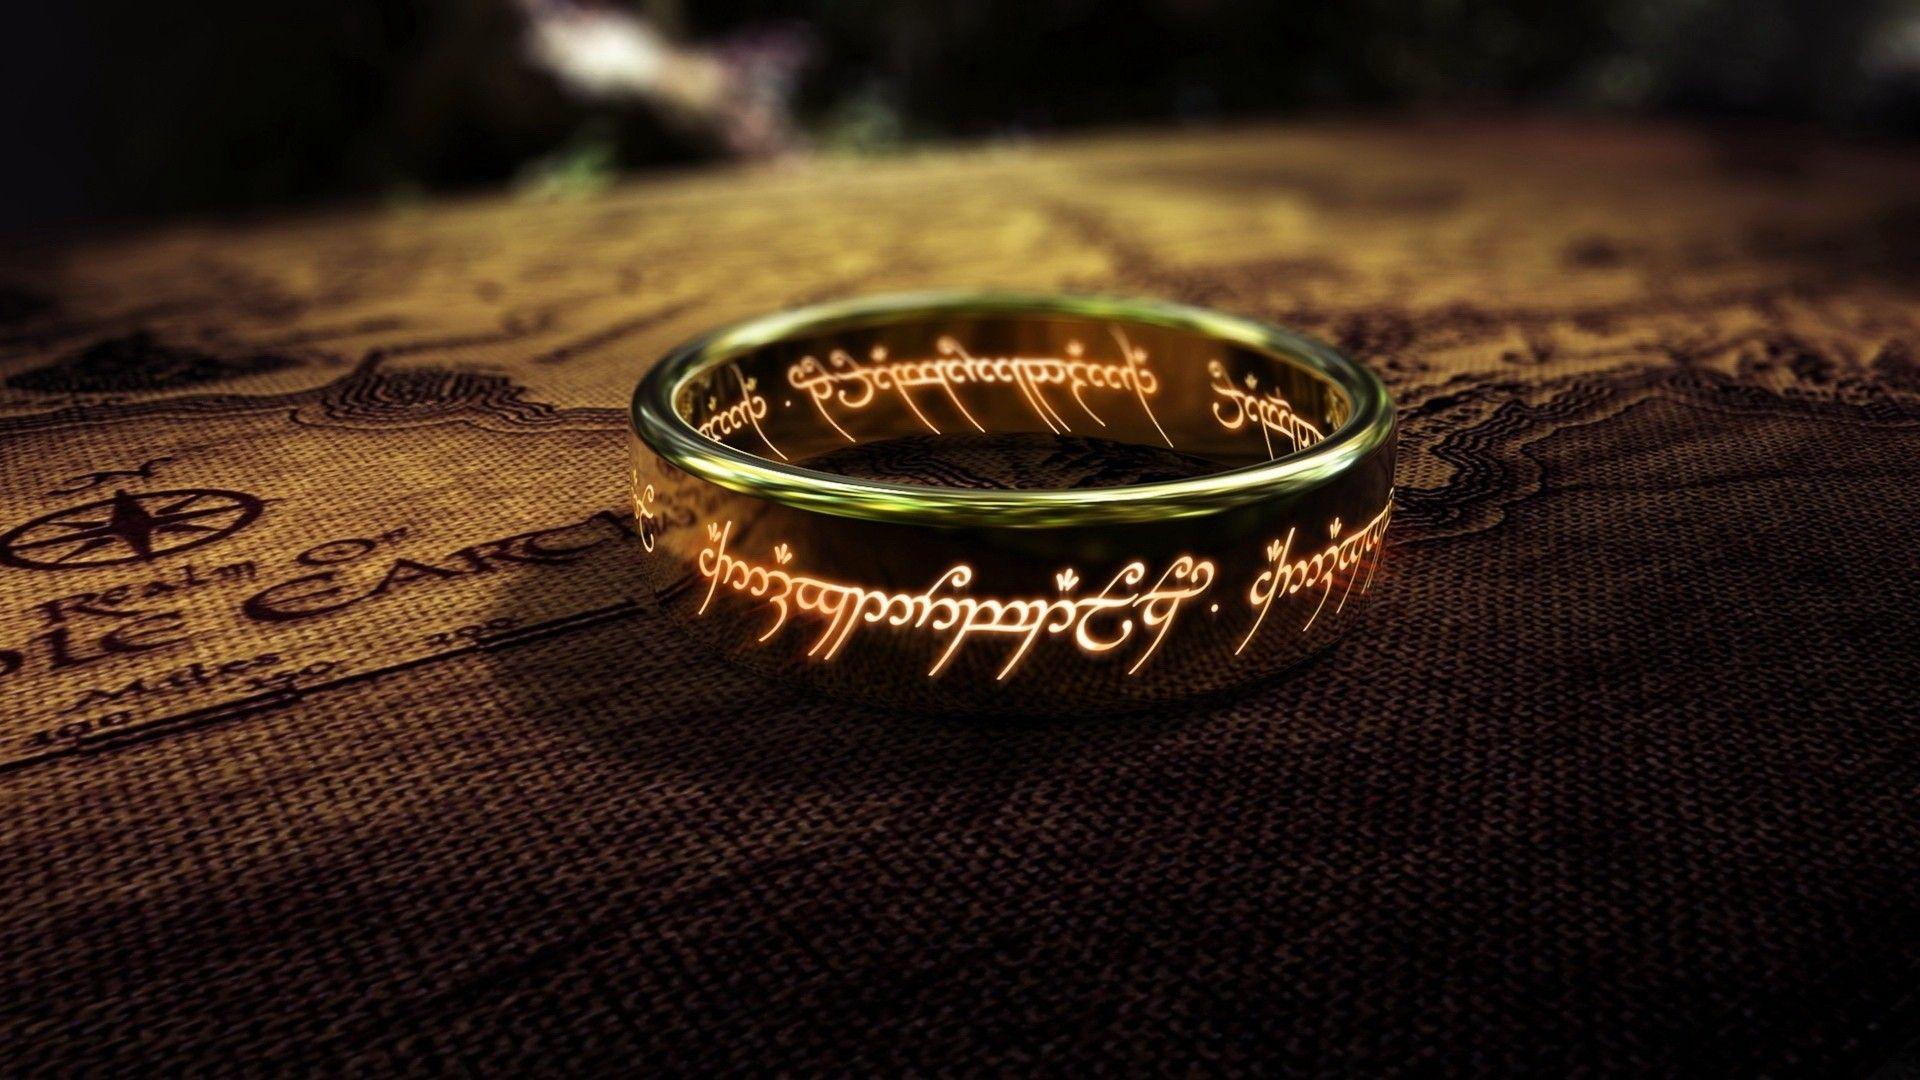 Lord Of The Rings Wallpaper, JK53 High Quality Wallpaper